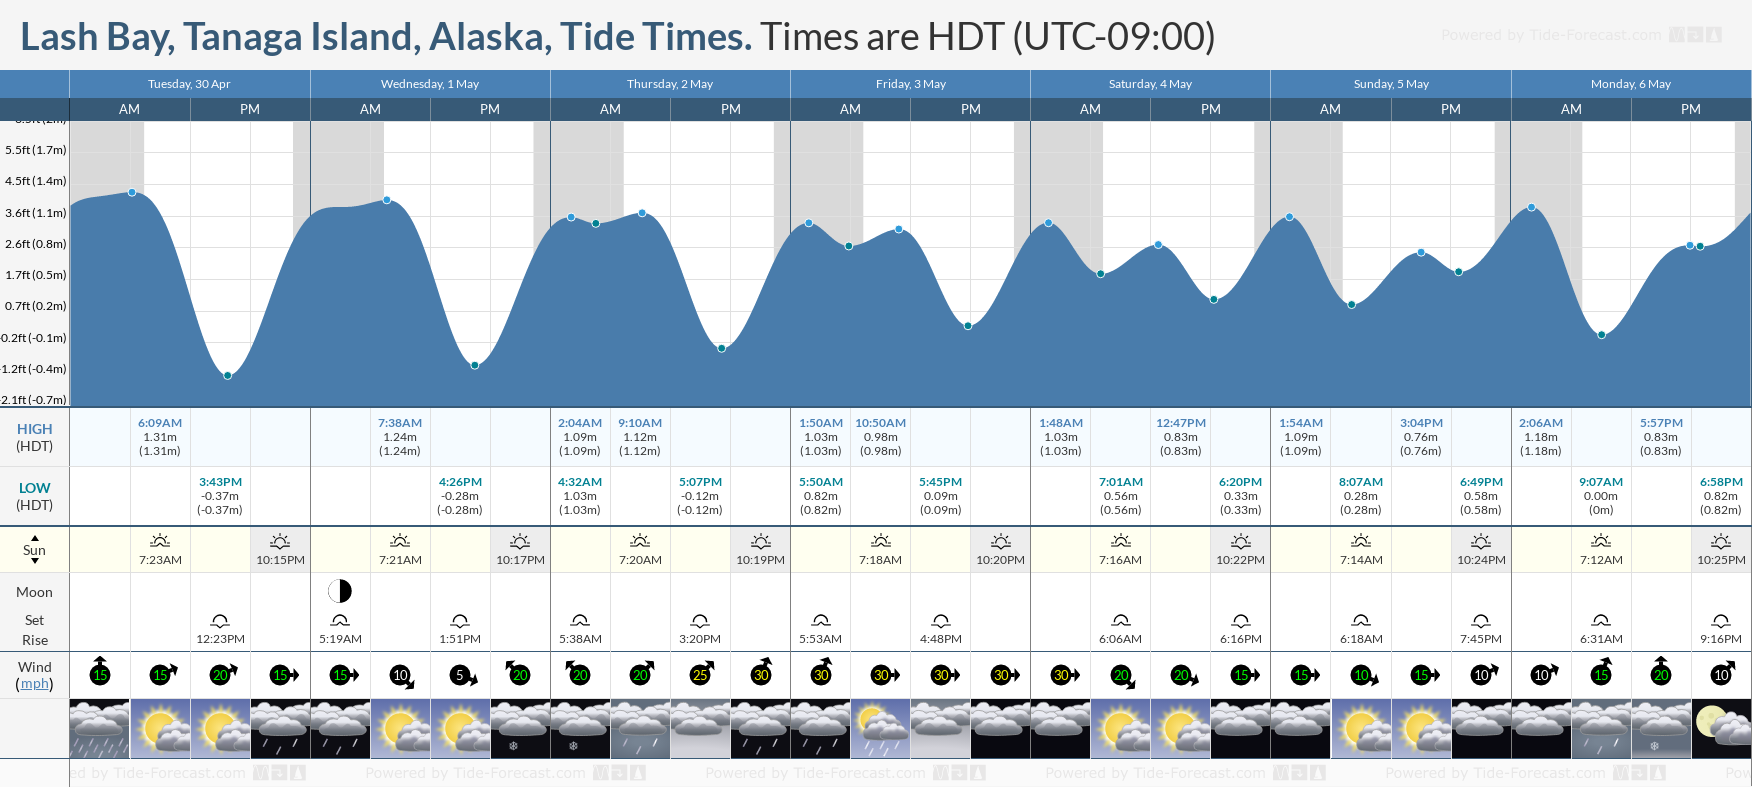 Lash Bay, Tanaga Island, Alaska Tide Chart including high and low tide tide times for the next 7 days